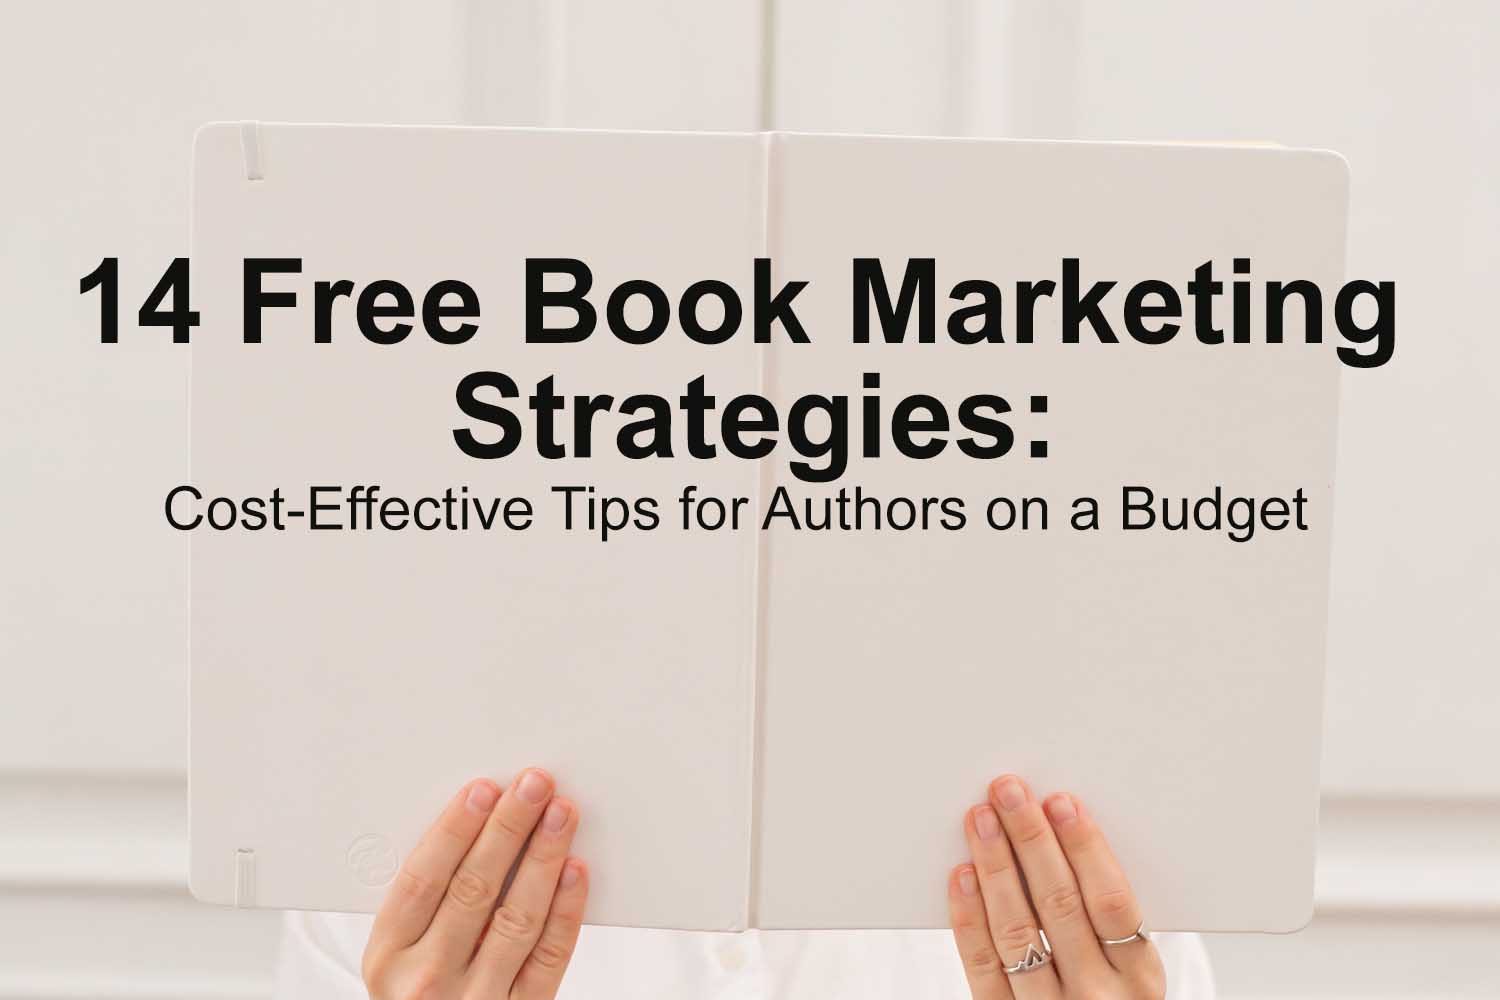 Cost-Effective Tips for Authors on a Budget